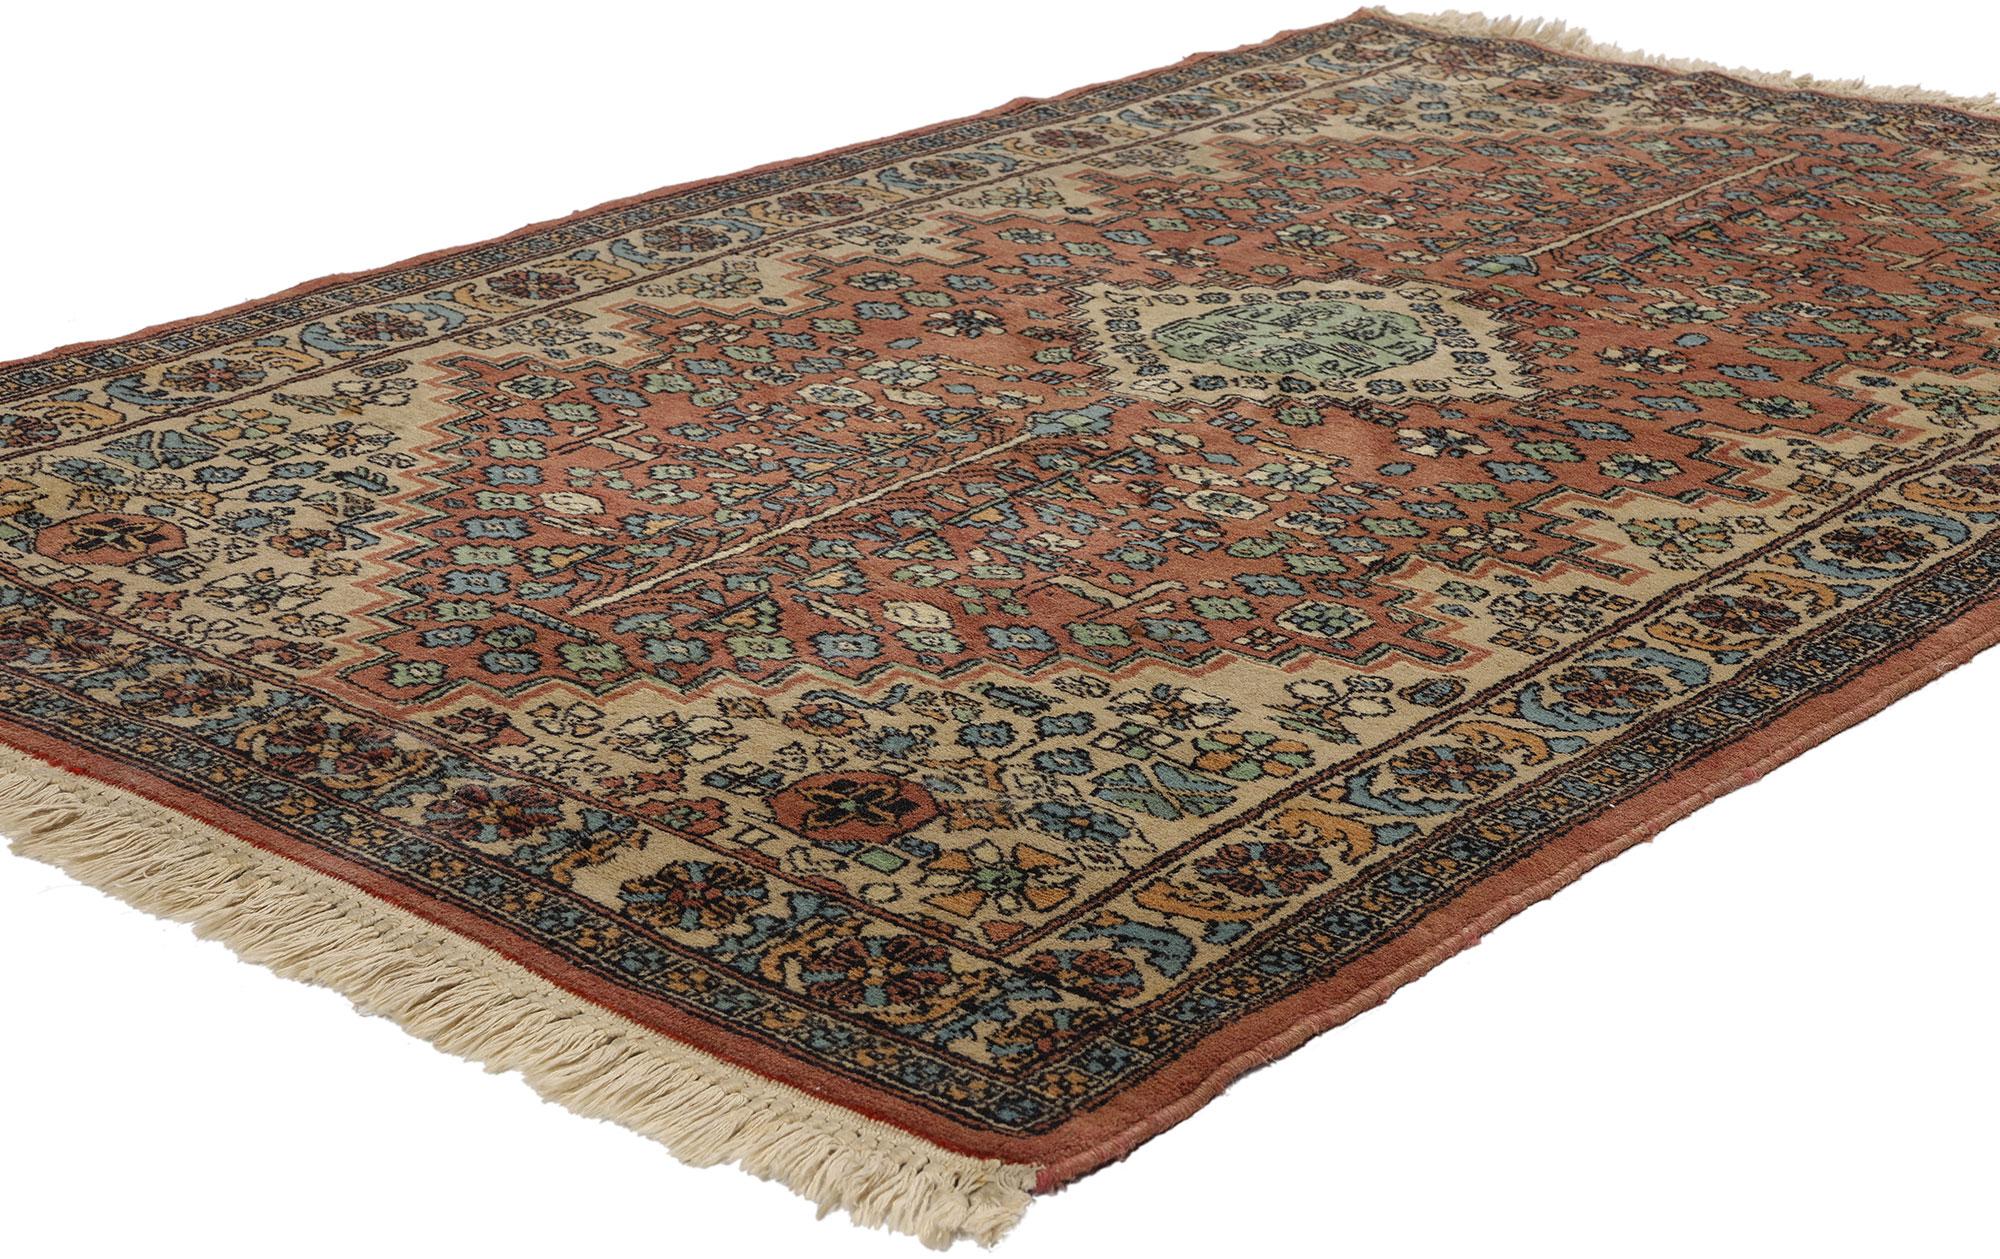 78713 Vintage Indian Mahal Rug, 03'04 x 05'02. Step into a world where timeless allure intertwines with tribal enchantment in the embrace of this vintage Indian Mahal rug. Hand-knotted with care and reverence, this vintage Indian rug invites you to